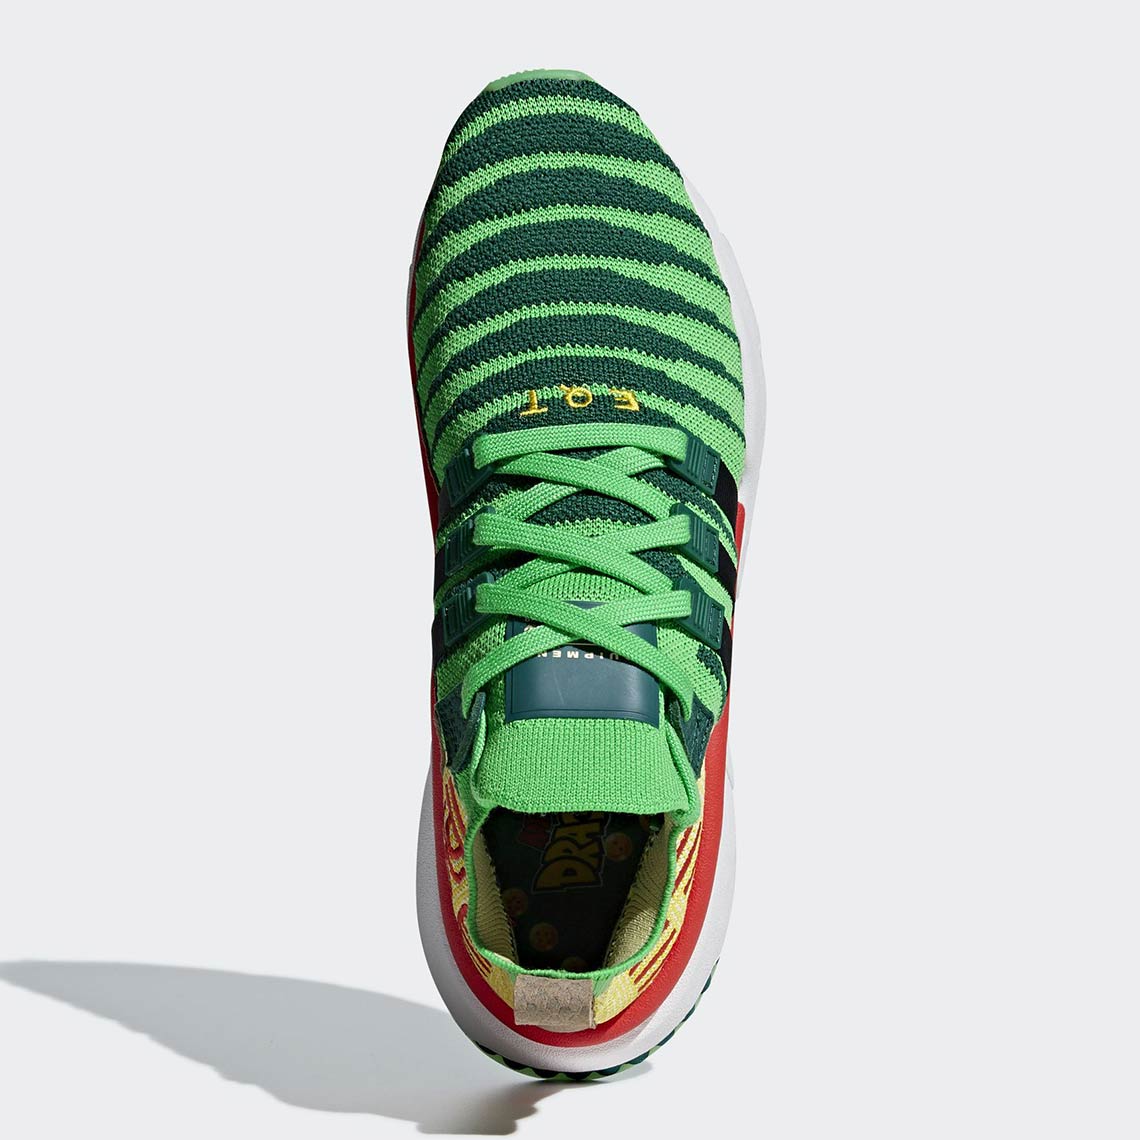 shenron shoes release date